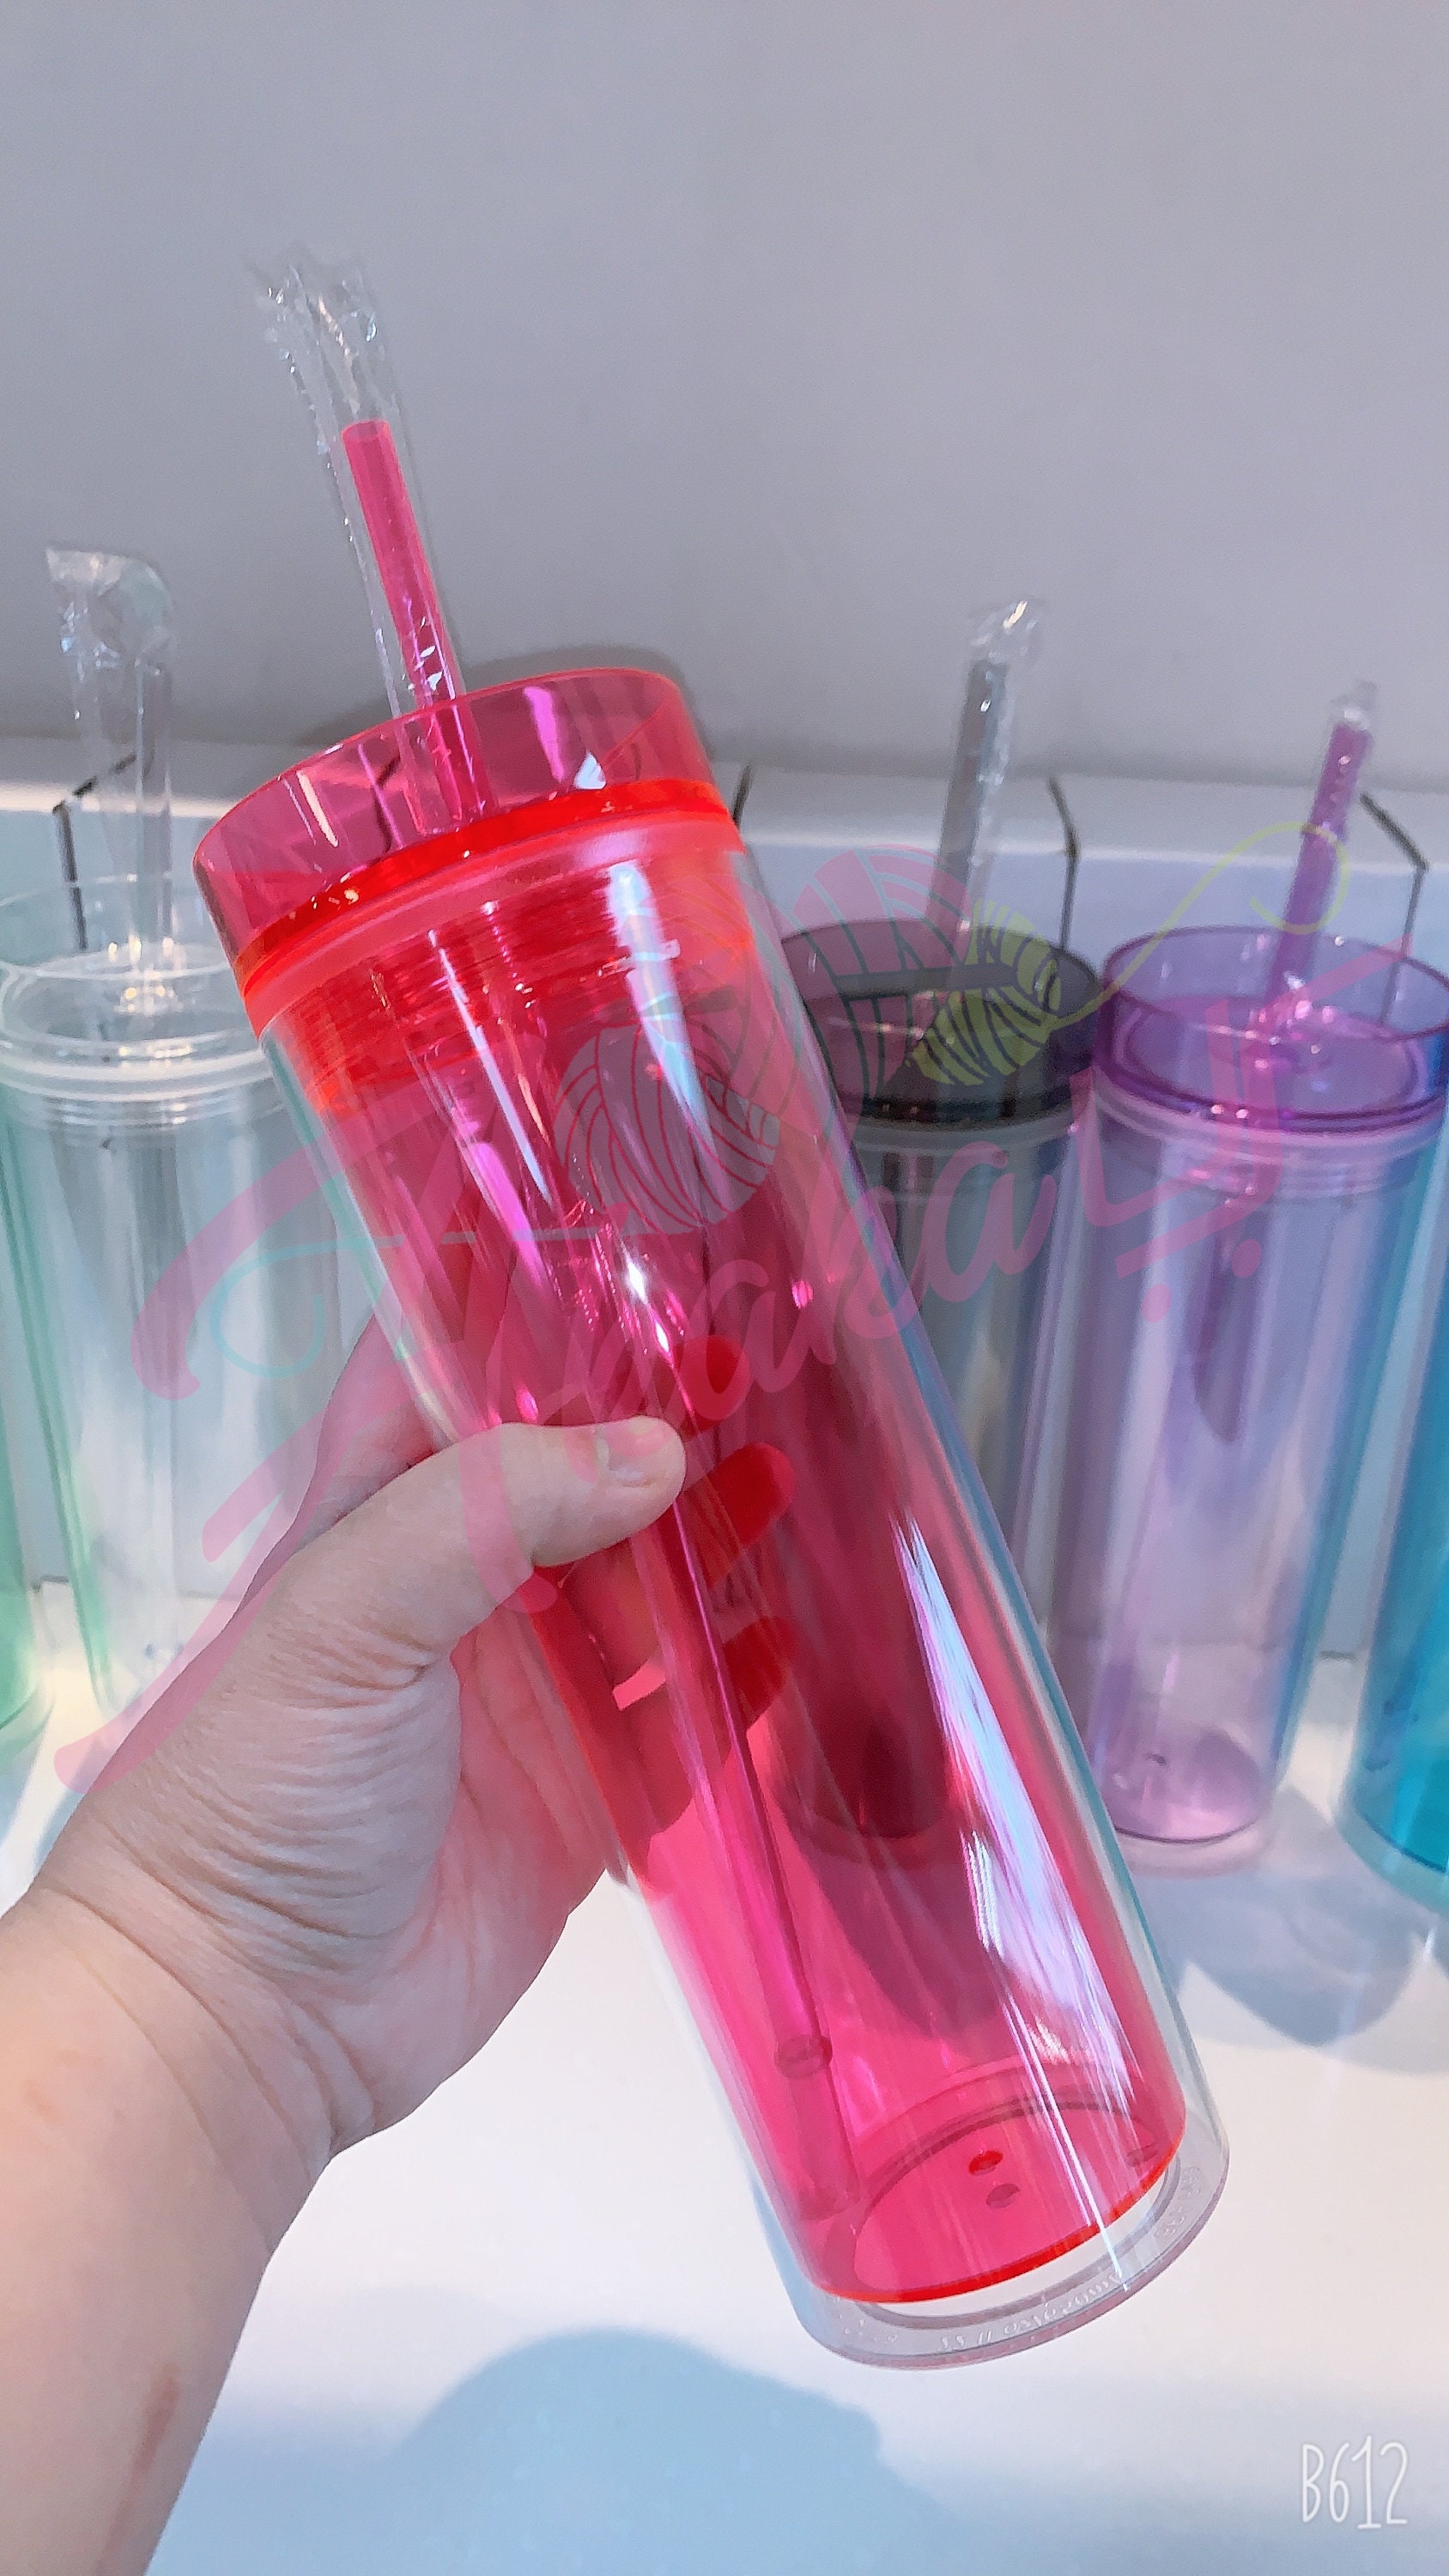 22OZ TUMBLERS Matte Colored Acrylic Bulk Tumblers With Straws With Lids And  Straws Double Wall Plastic Resuable Cup Bulk Tumblers With Straws From  Officesupply, $4.78